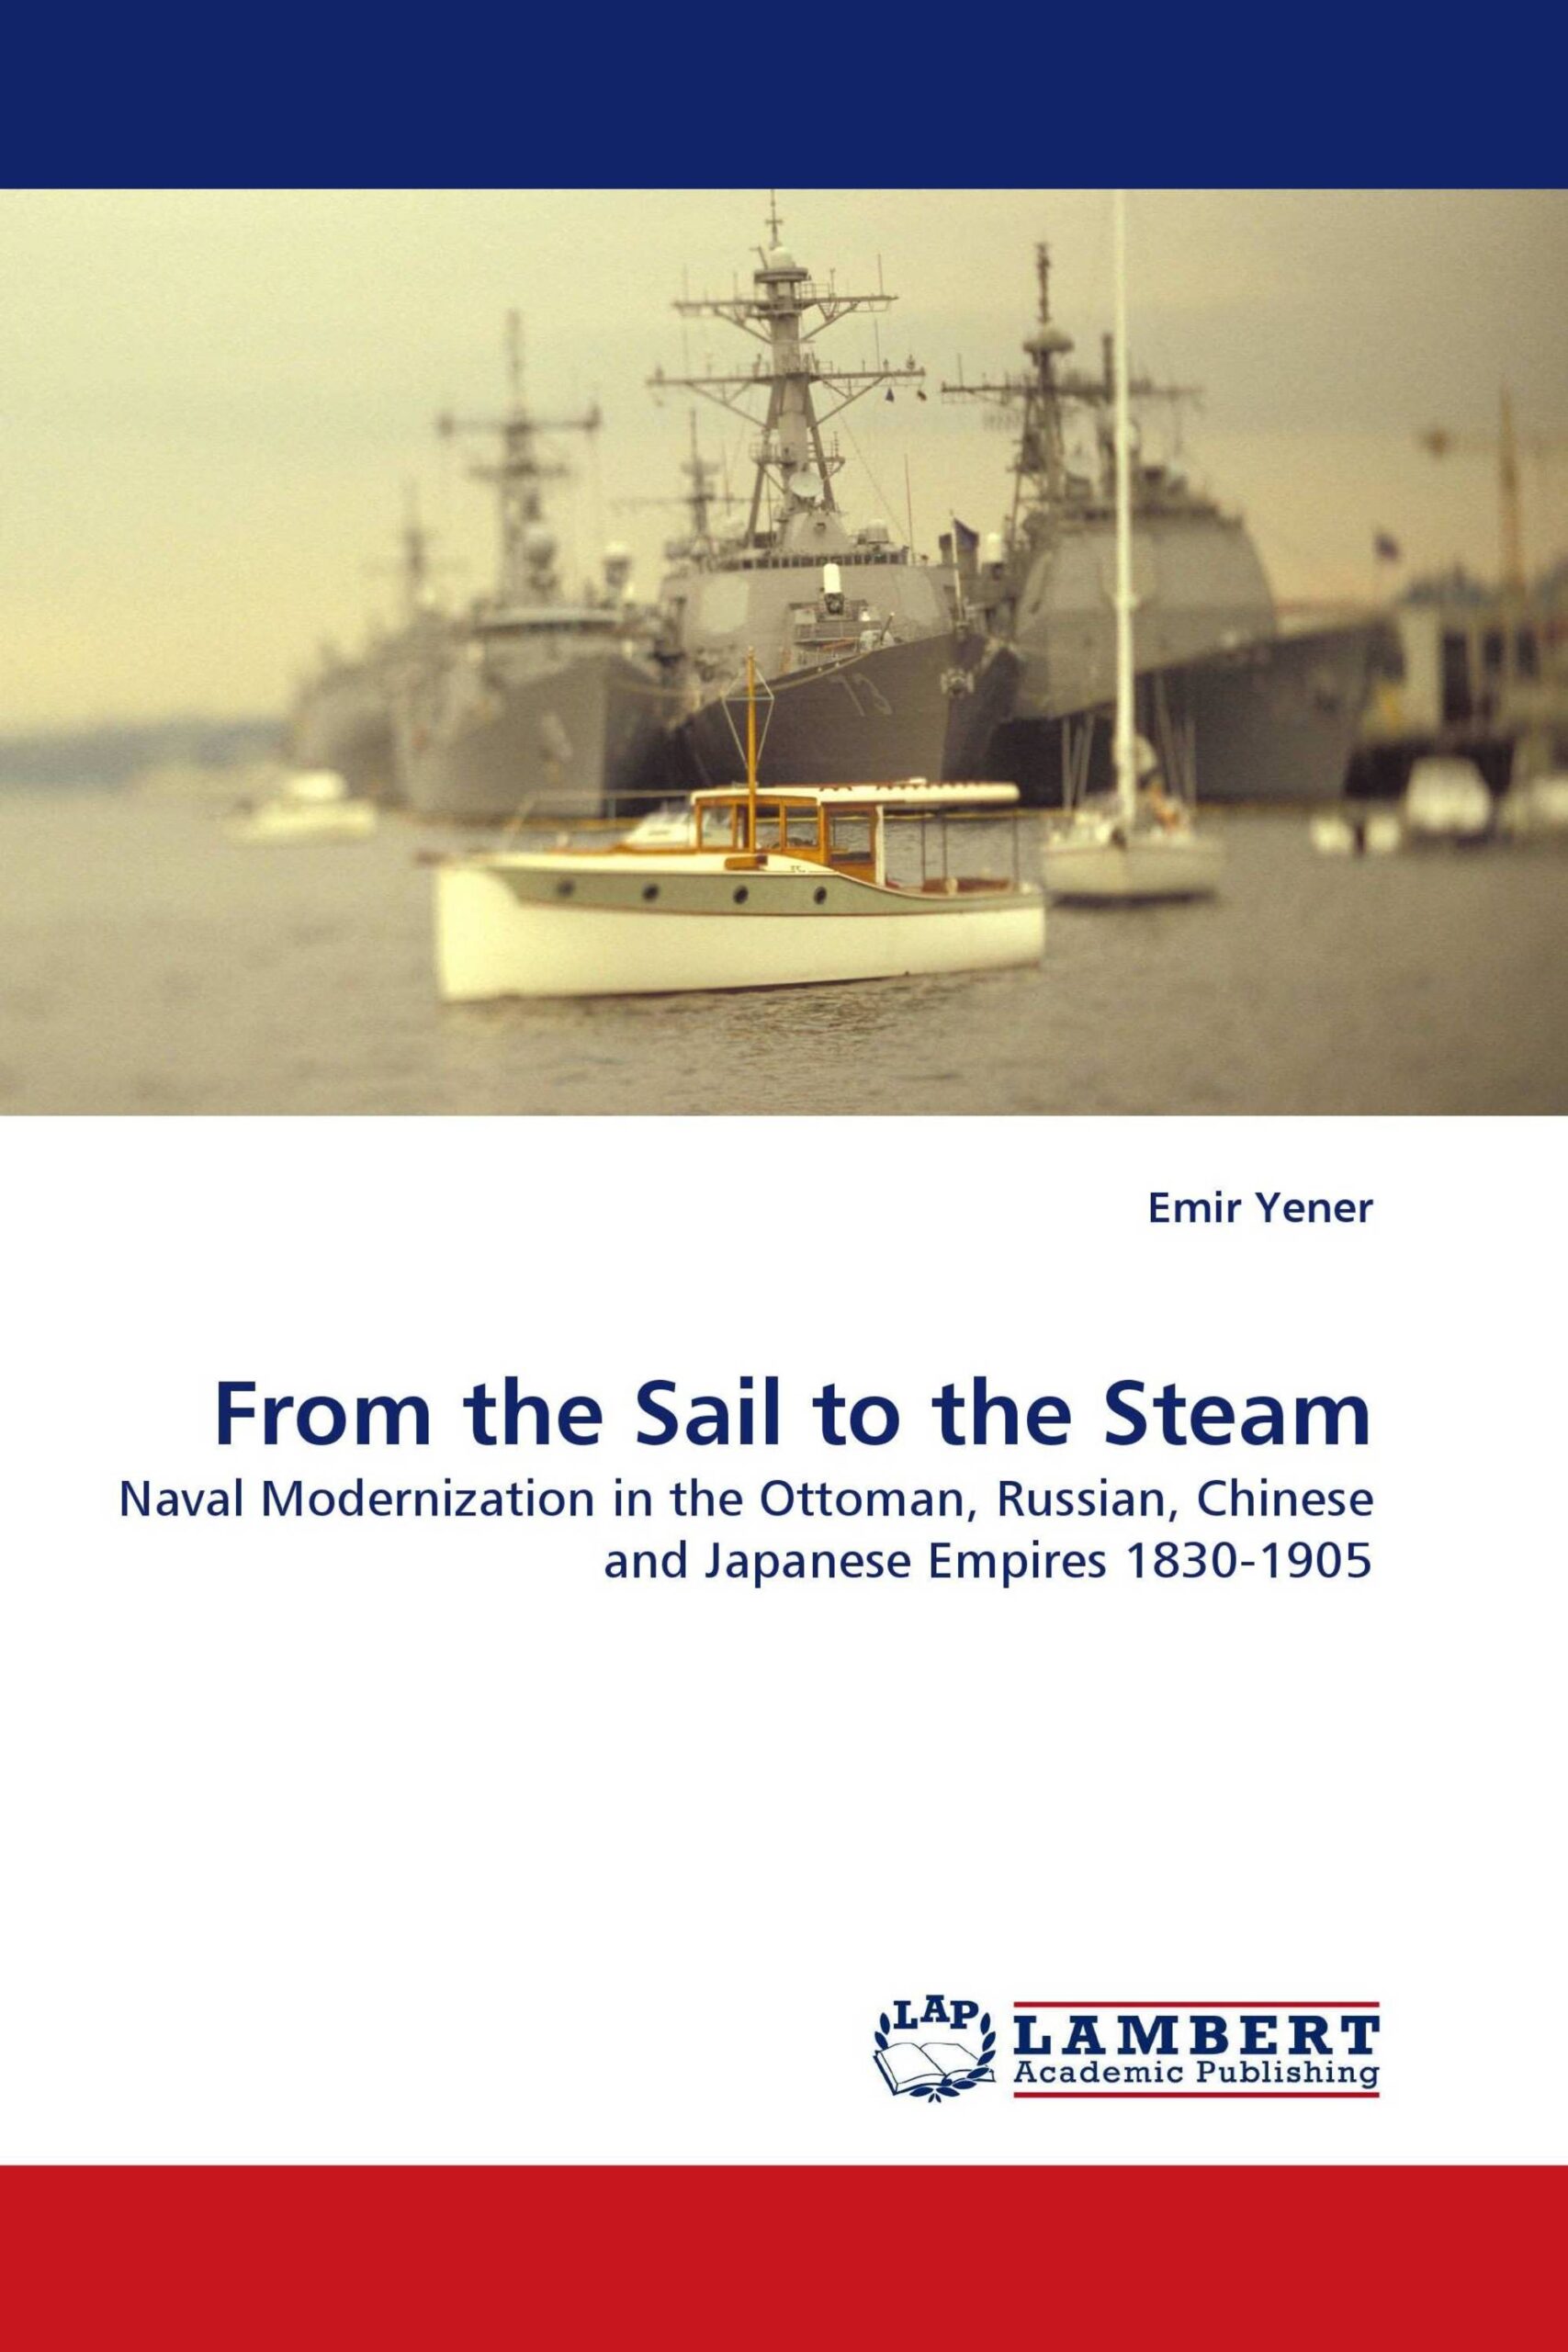 From The Sail To the Steam - Naval Modernization In the Ottoman, Russian, Chinese And Japanese Empires -1830-1905